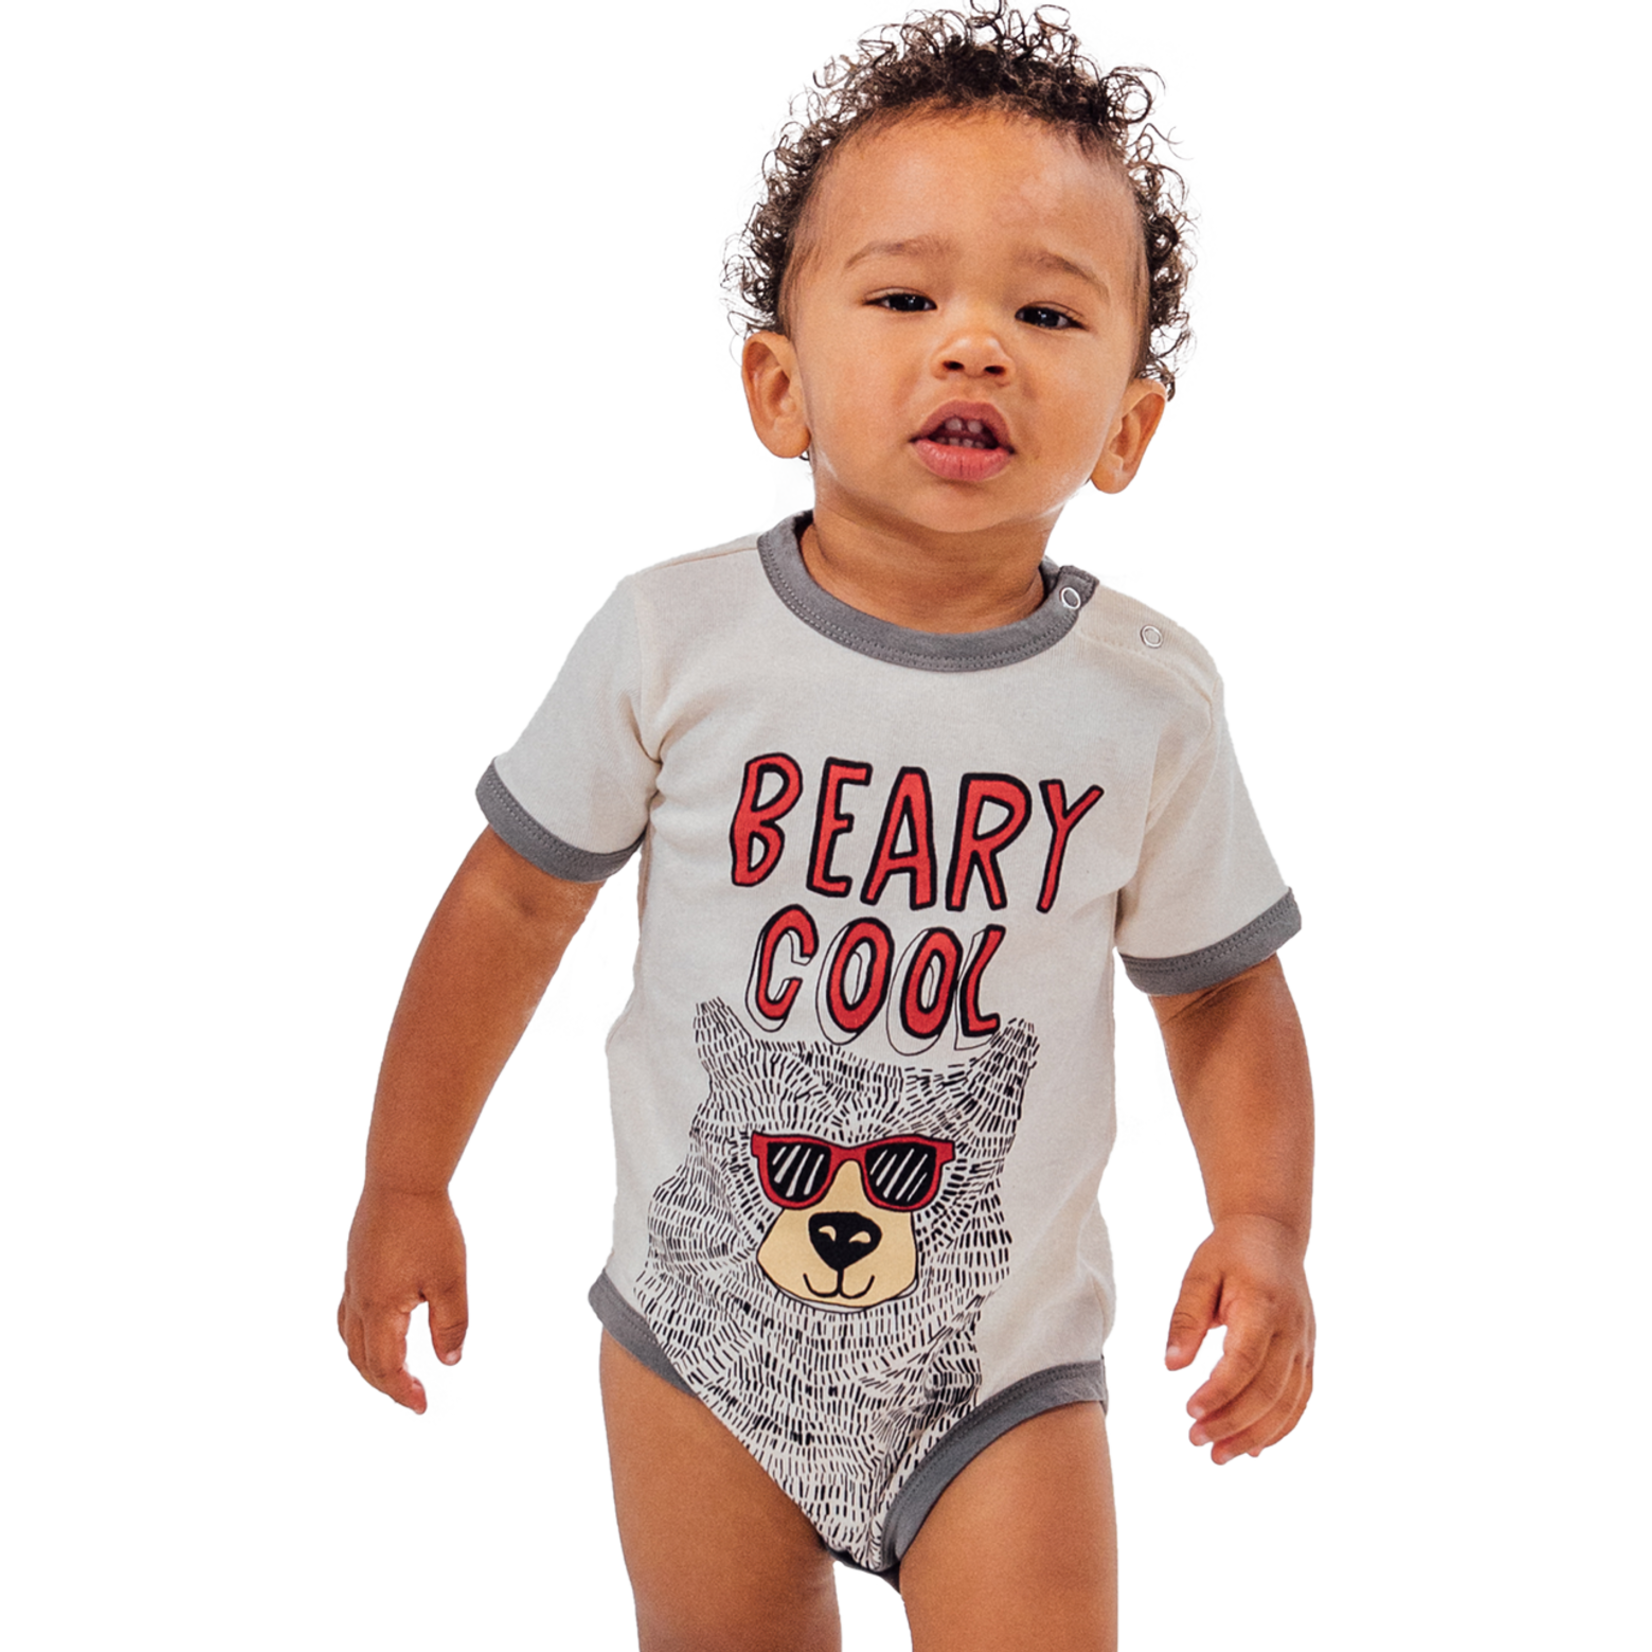 Lazy One Beary Cool Infant Creeper Onesie